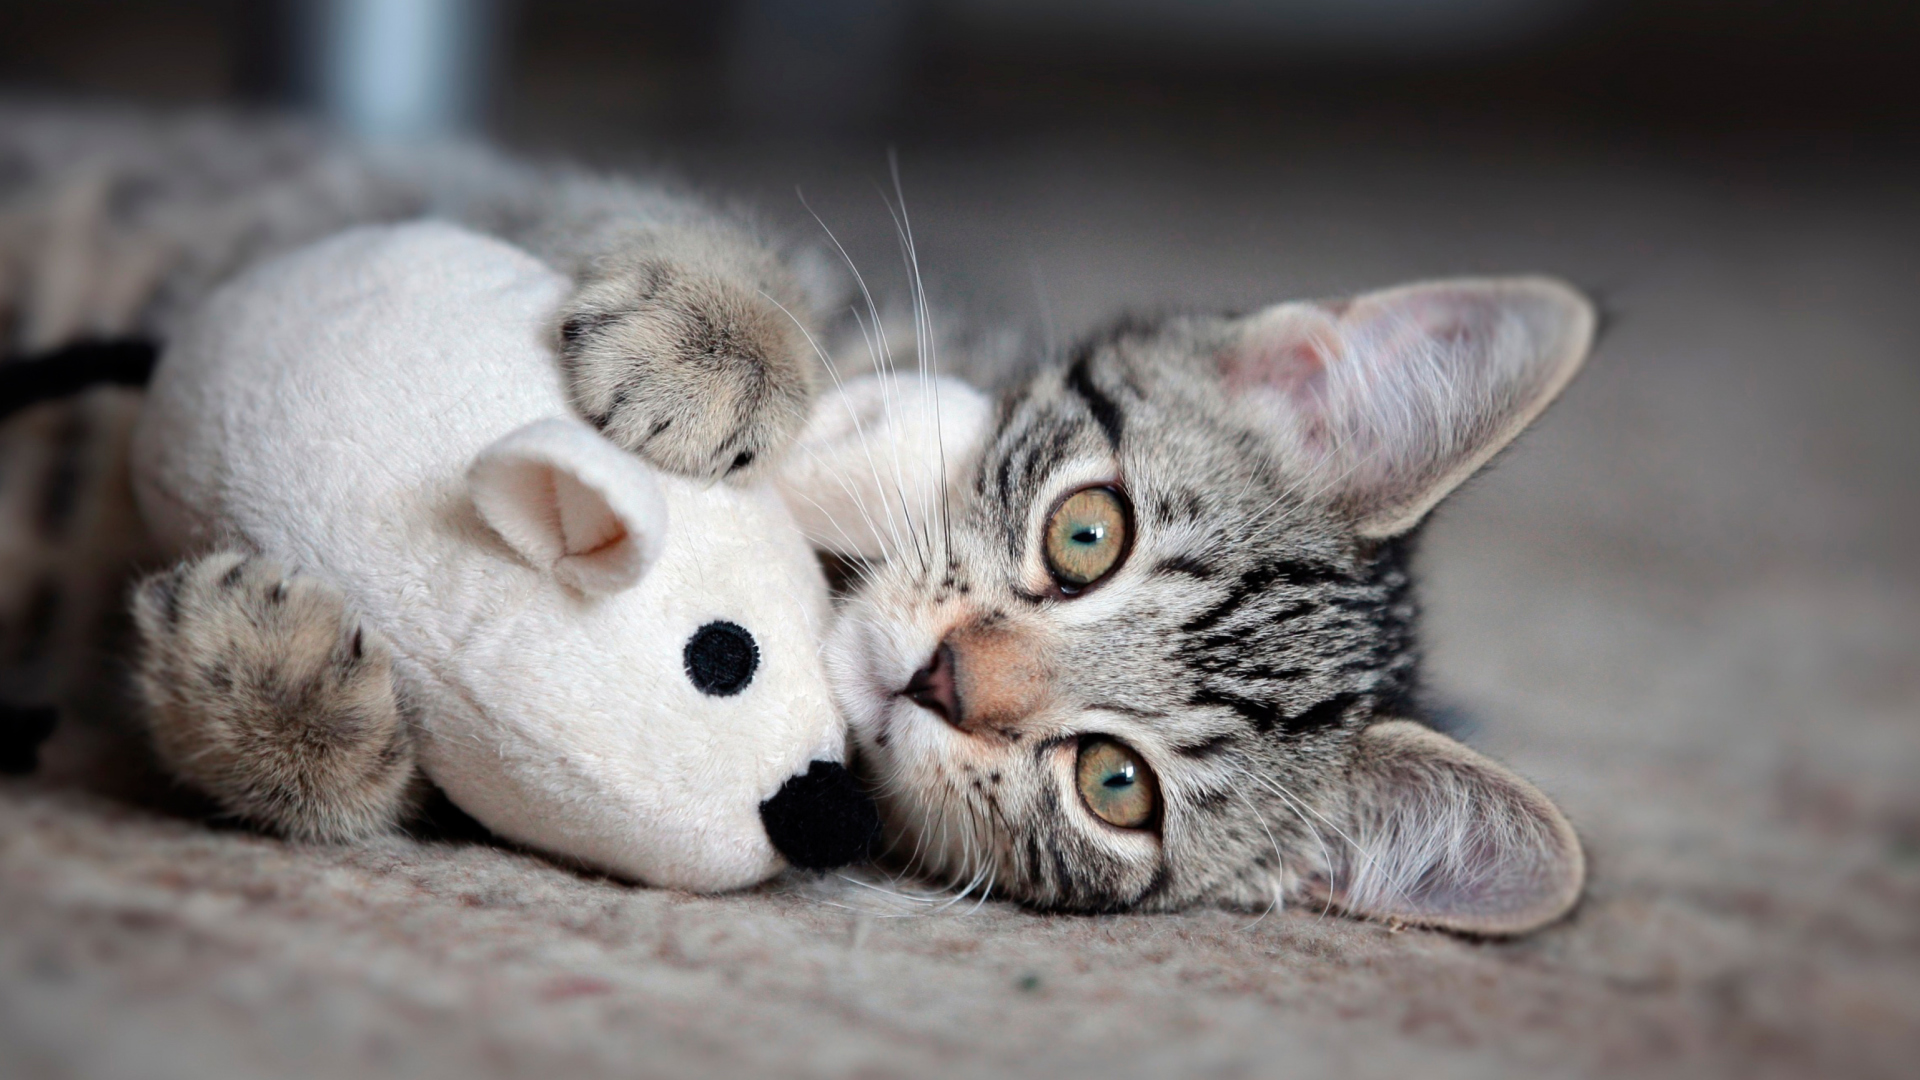 Adorable Kitten With Toy Mouse wallpaper 1920x1080